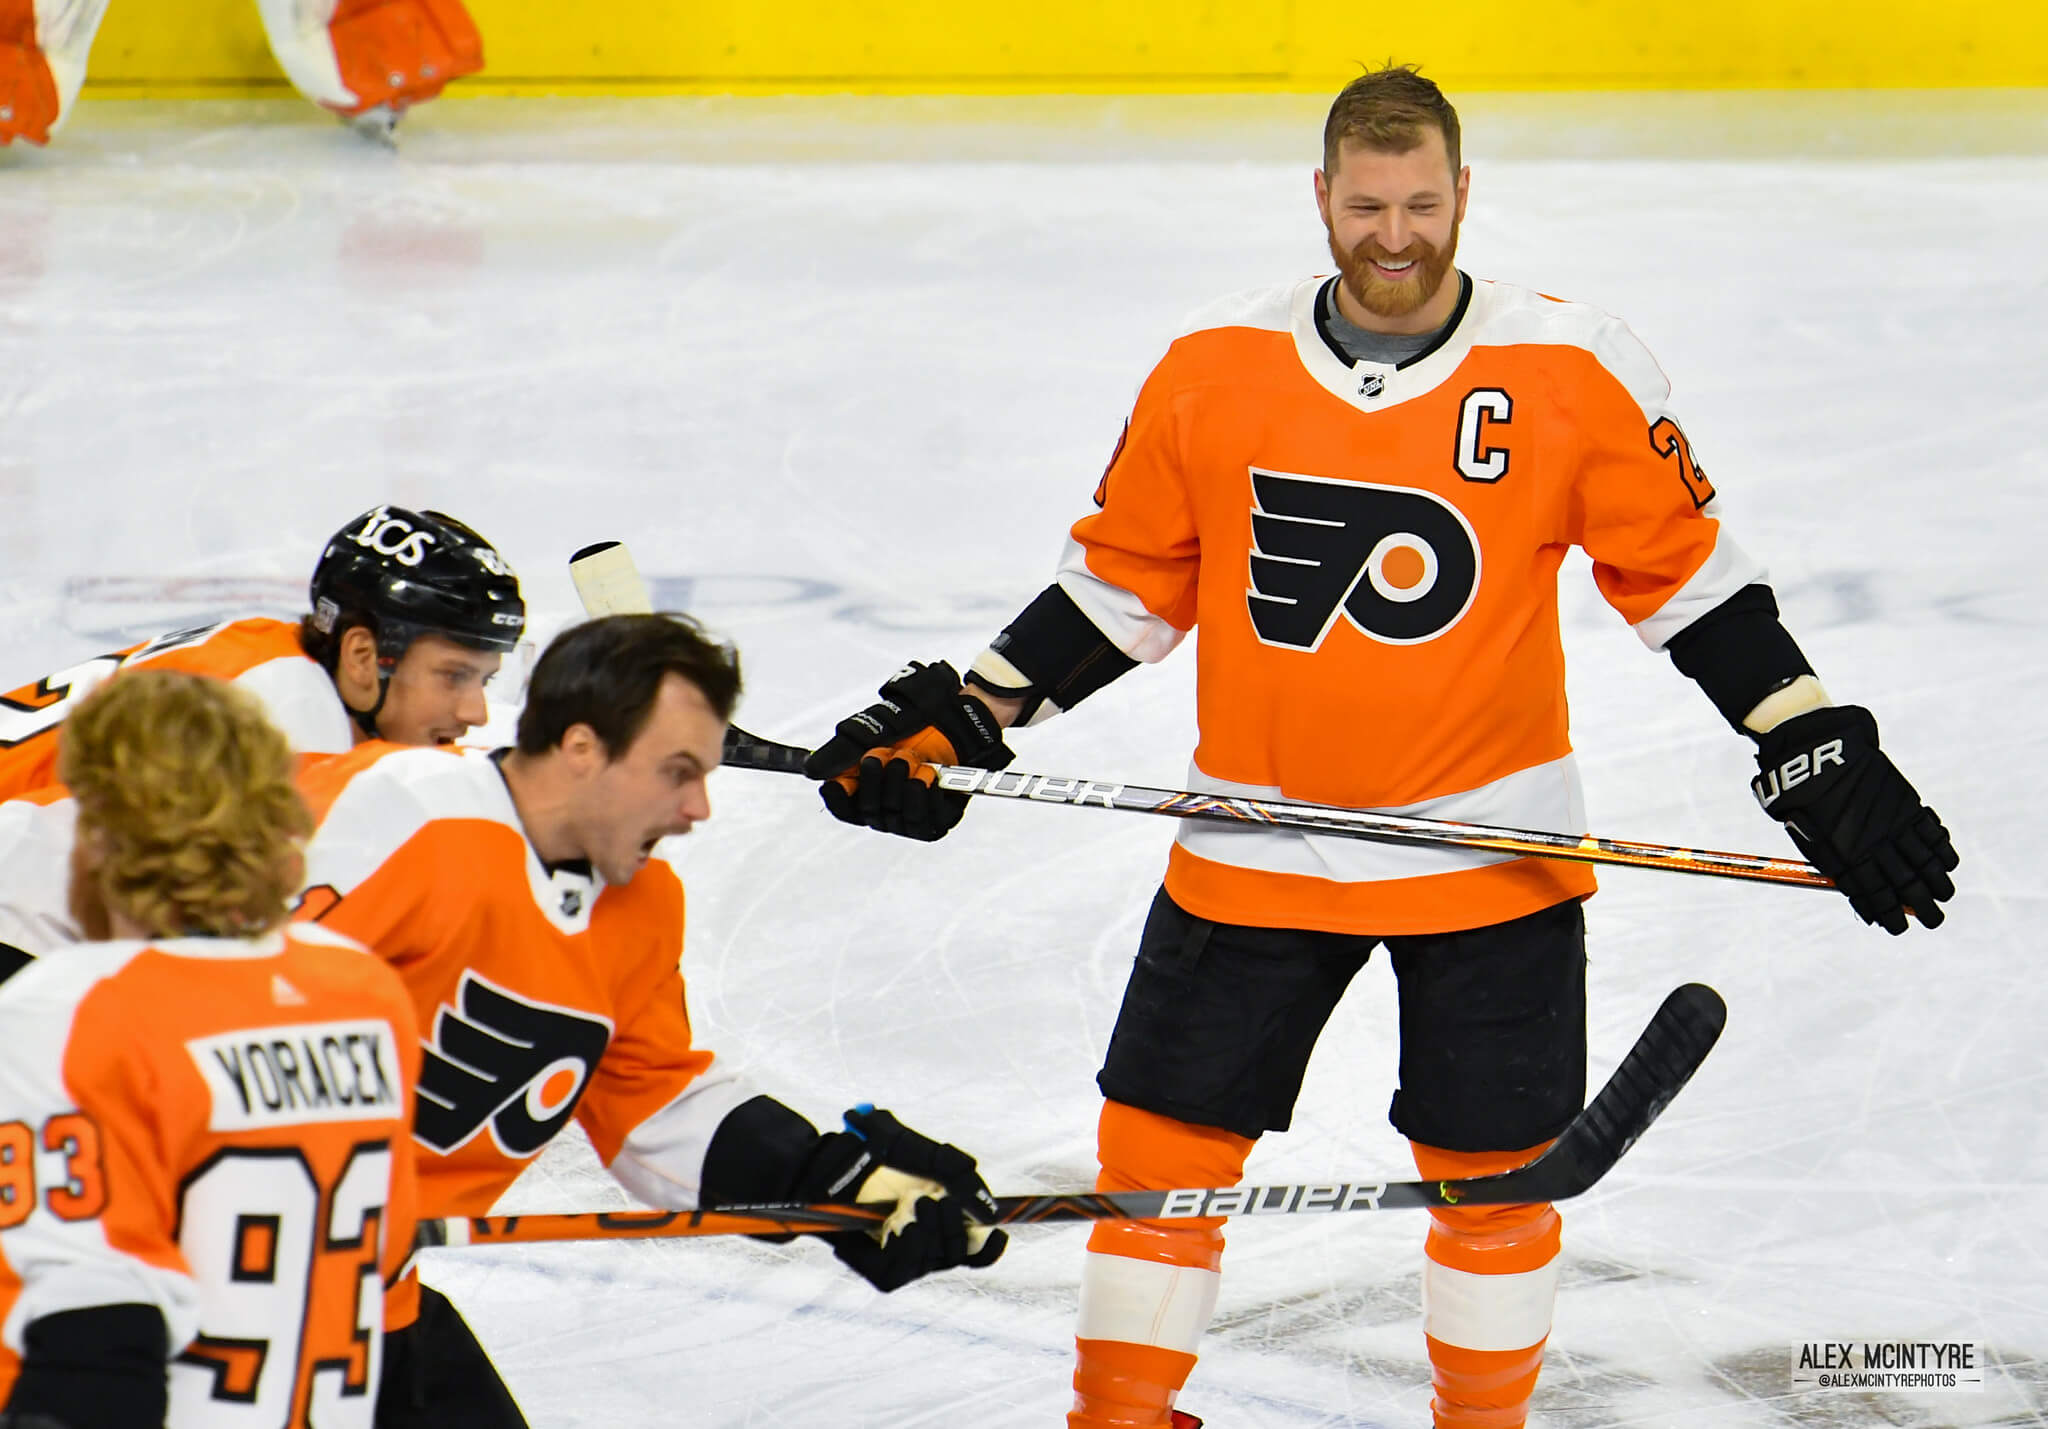 The 2010s: The ultimate Philadelphia Flyers team, featuring Giroux